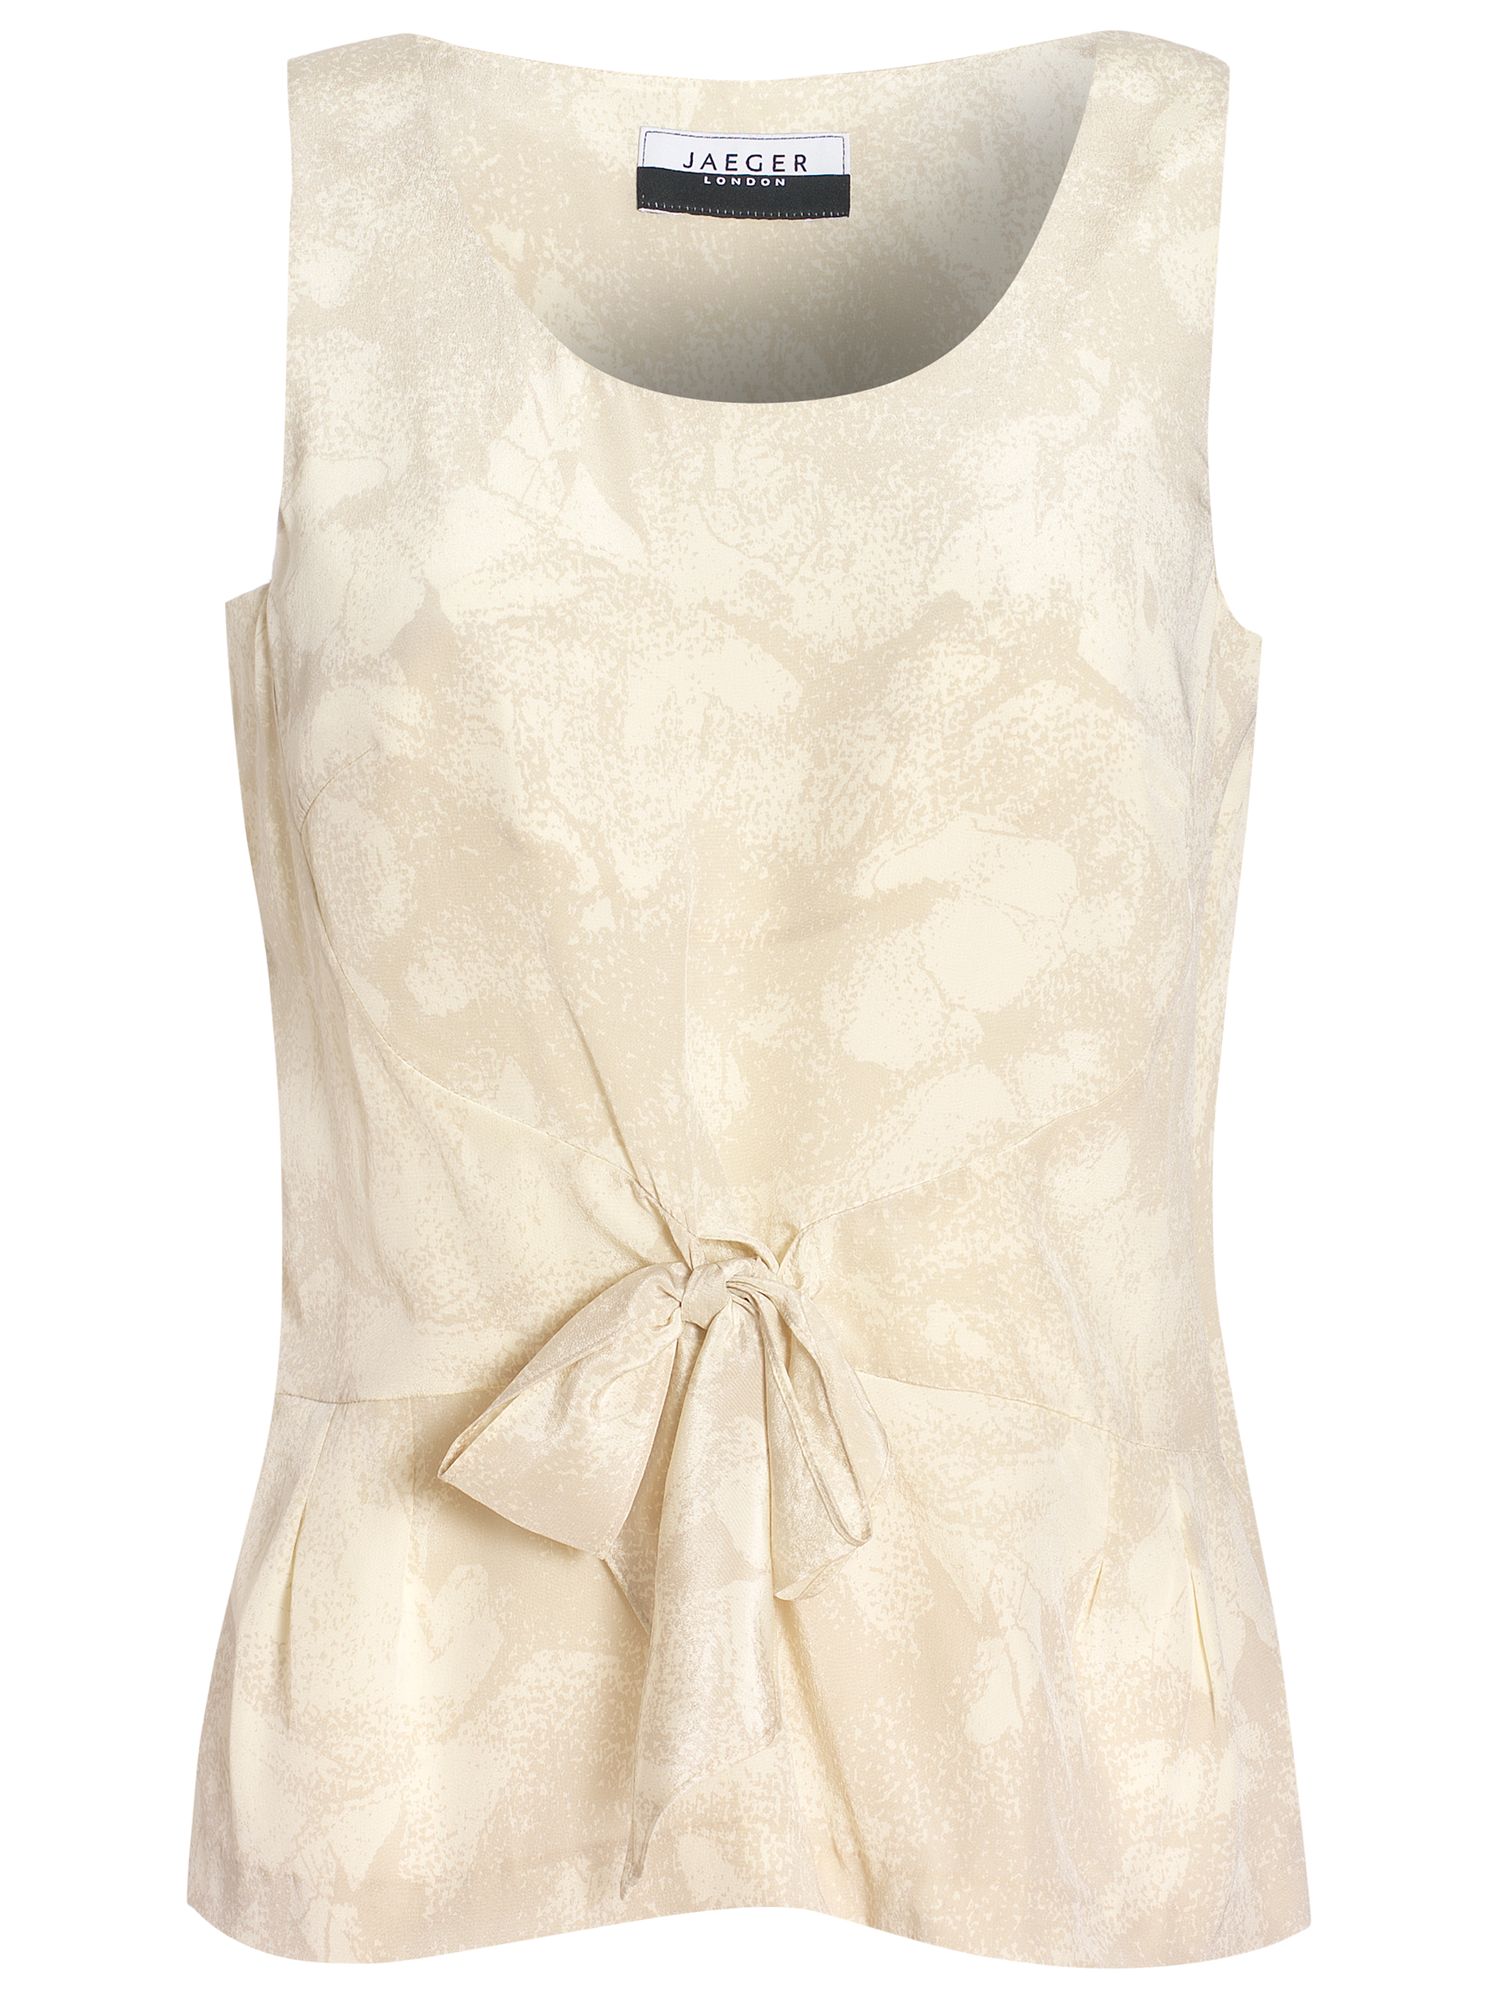 Jaeger London Tie Front Blouse, Ivory